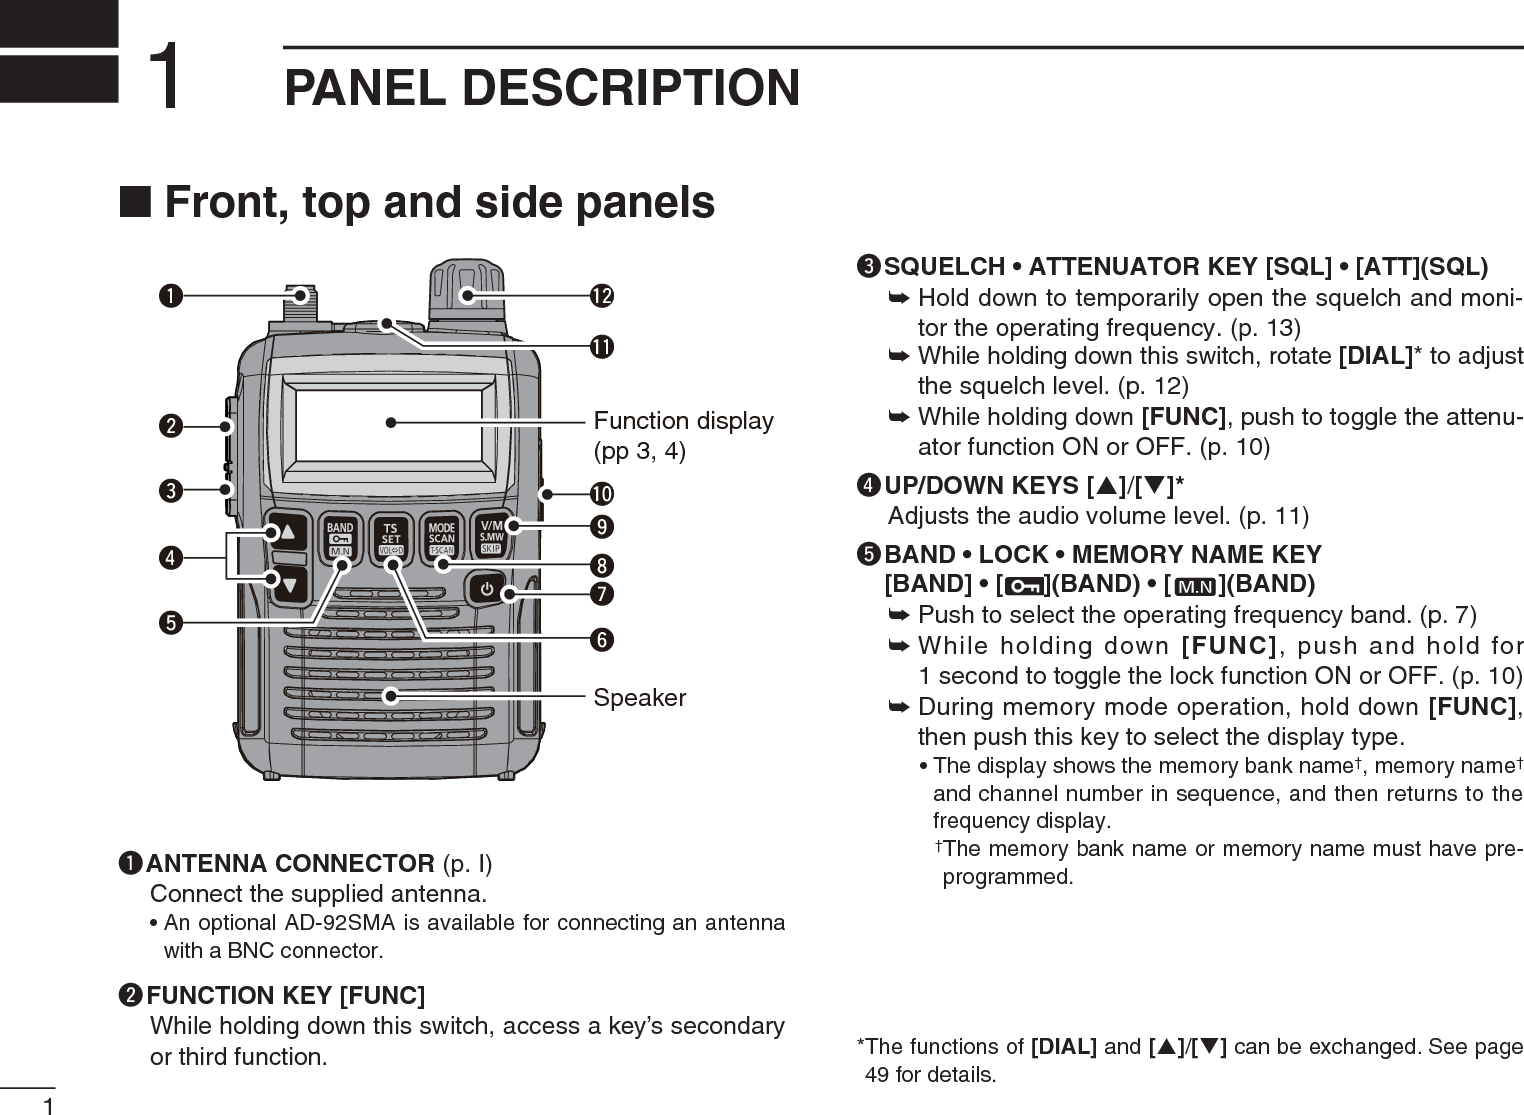 1PANEL DESCRIPTION1N Front, top and side panels!2!0utrew!1qFunction display(pp 3, 4)SpeakeroiyqANTENNA CONNECTOR (p. I)Connect the supplied antenna.• An optional AD-92SMA is available for connecting an antenna with a BNC connector.wFUNCTION KEY [FUNC]While holding down this switch, access a key’s secondary or third function.eSQUELCH • ATTENUATOR KEY [SQL] • [ATT](SQL)±Hold down to temporarily open the squelch and moni-tor the operating frequency. (p. 13)±While holding down this switch, rotate [DIAL]* to adjust the squelch level. (p. 12)±While holding down [FUNC], push to toggle the attenu-ator function ON or OFF. (p. 10)rUP/DOWN KEYS [S]/[T]*Adjusts the audio volume level. (p. 11)t  BAND • LOCK • MEMORY NAME KEY[BAND] • [ ](BAND) • [ ](BAND)± Push to select the operating frequency band. (p. 7)±While holding down [FUNC], push and hold for 1 second to toggle the lock function ON or OFF. (p. 10)±During memory mode operation, hold down [FUNC],then push this key to select the display type.• The display shows the memory bank name†, memory name†and channel number in sequence, and then returns to the frequency display.†The memory bank name or memory name must have pre-programmed.*The functions of [DIAL] and [S]/[T] can be exchanged. See page 49 for details.